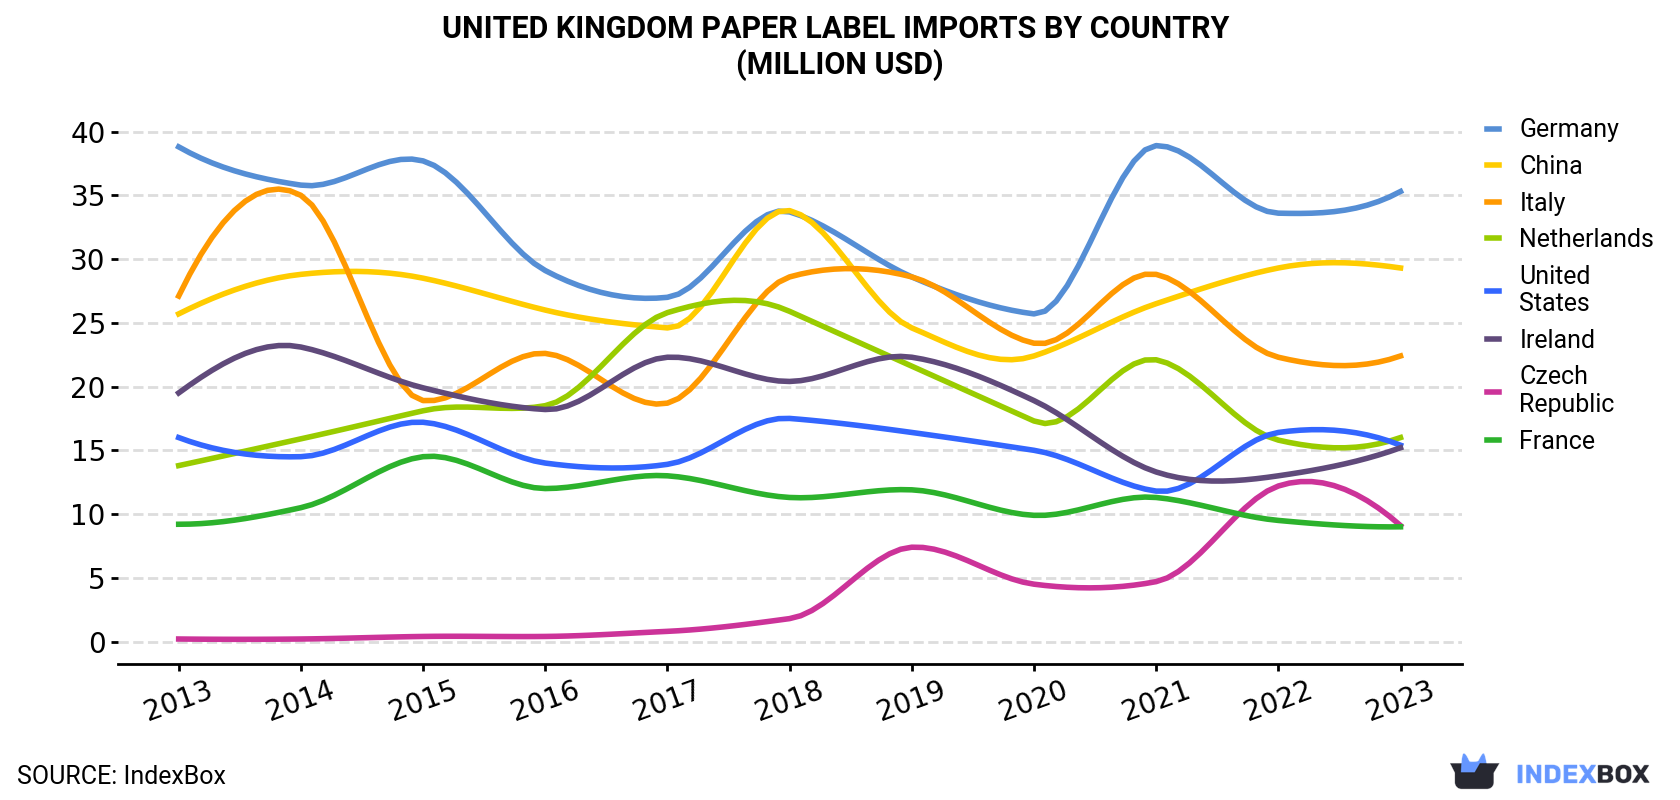 United Kingdom Paper Label Imports By Country (Million USD)